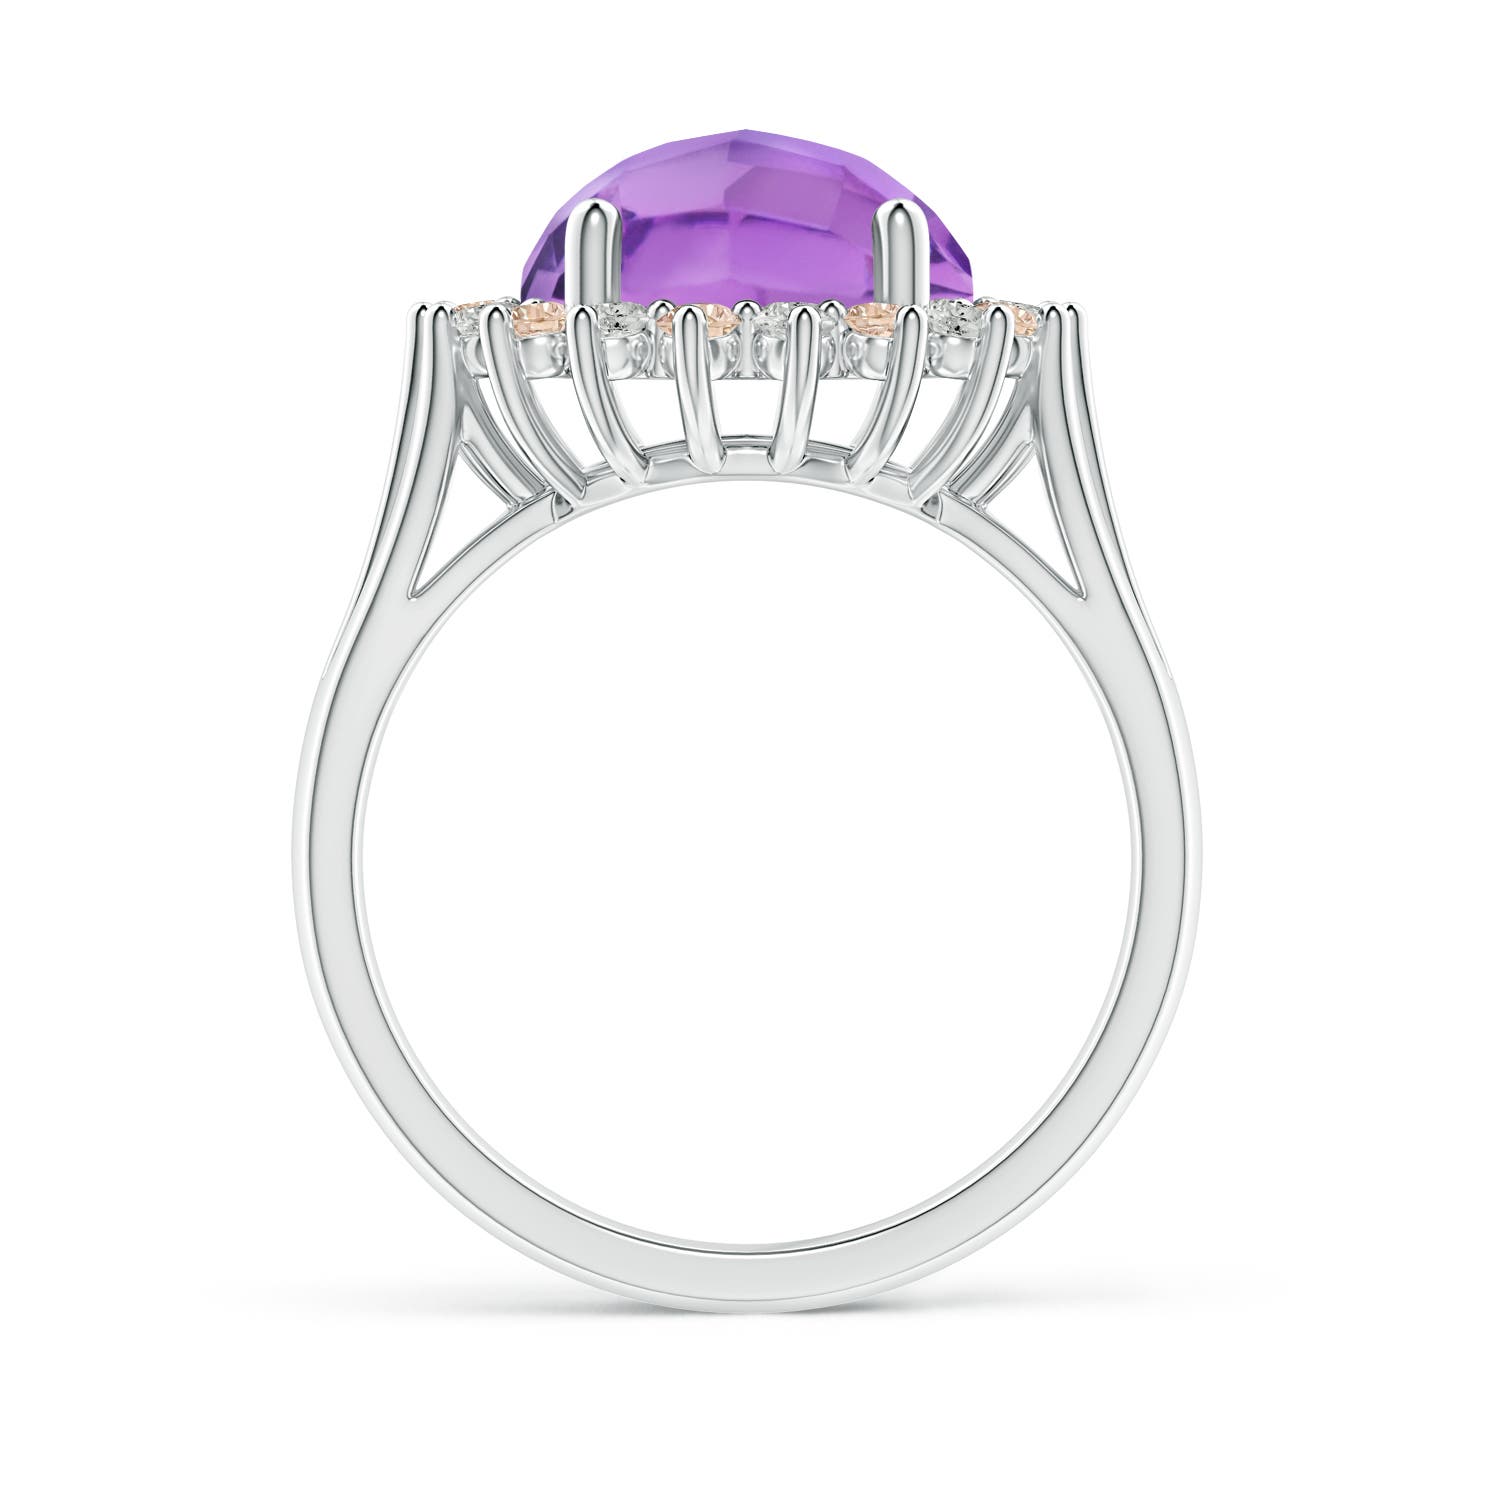 A - Amethyst / 4.17 CT / 14 KT White Gold